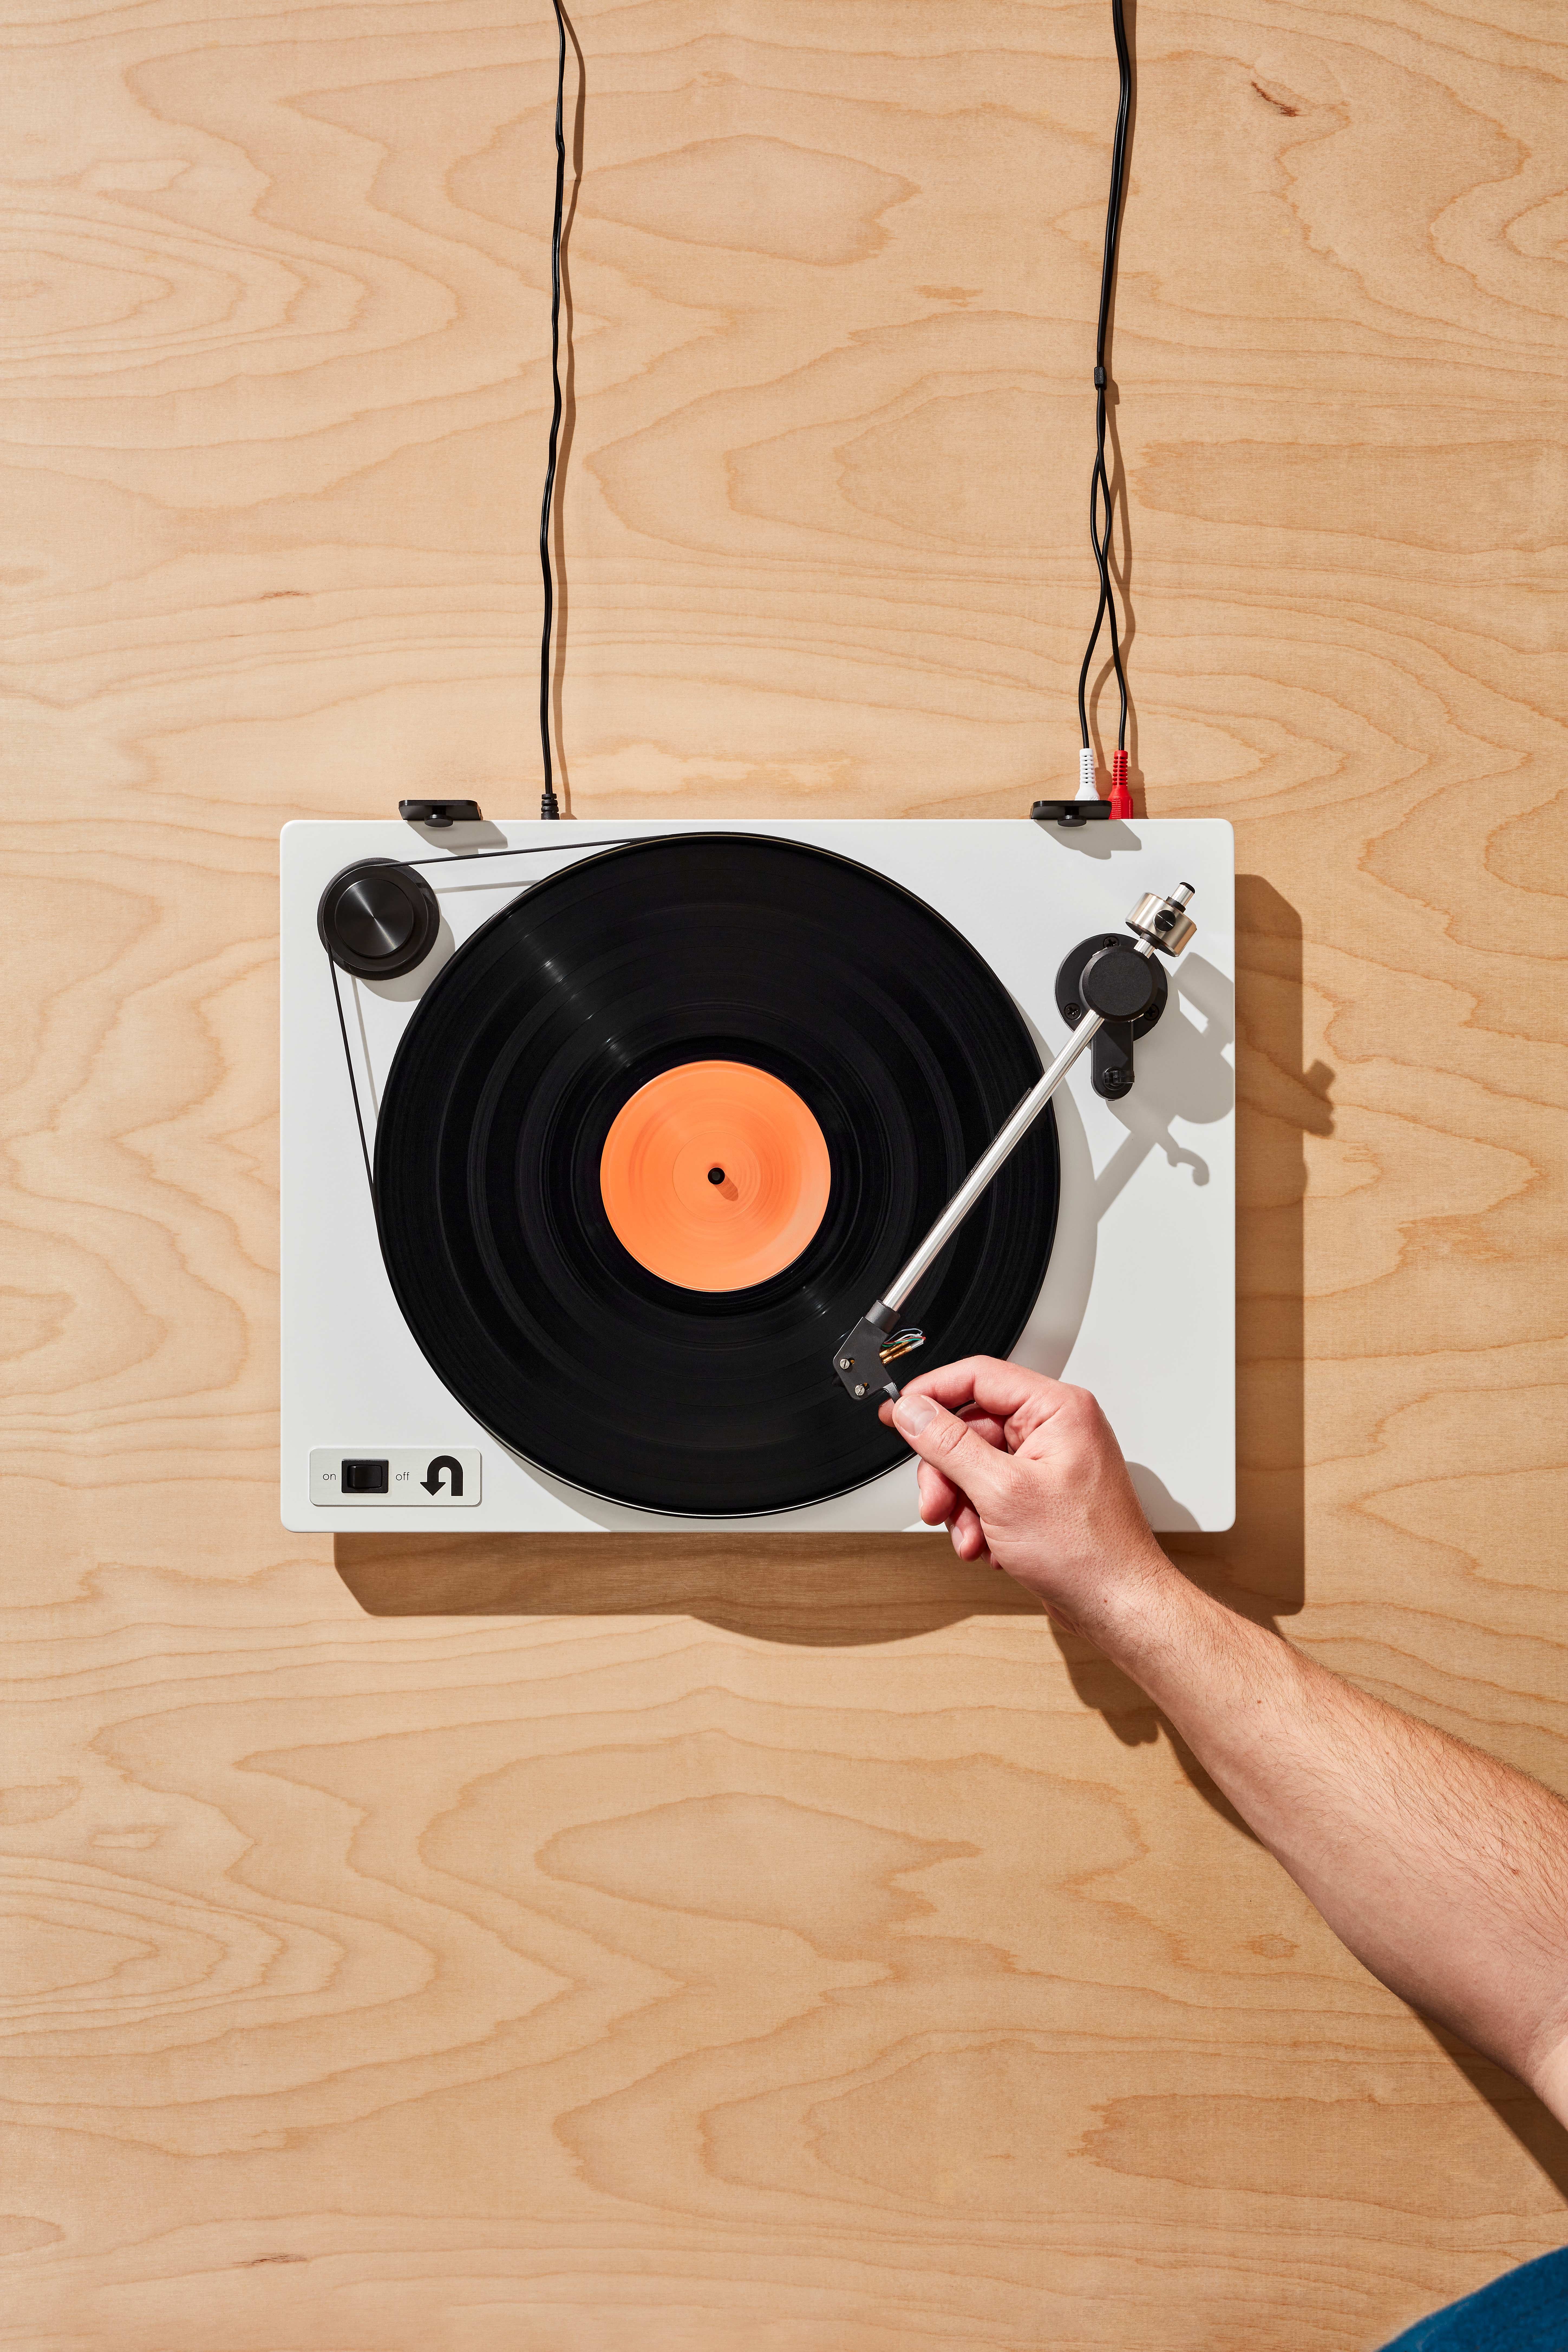 Music Experts Picked the Best Records to Play on Your Turntable